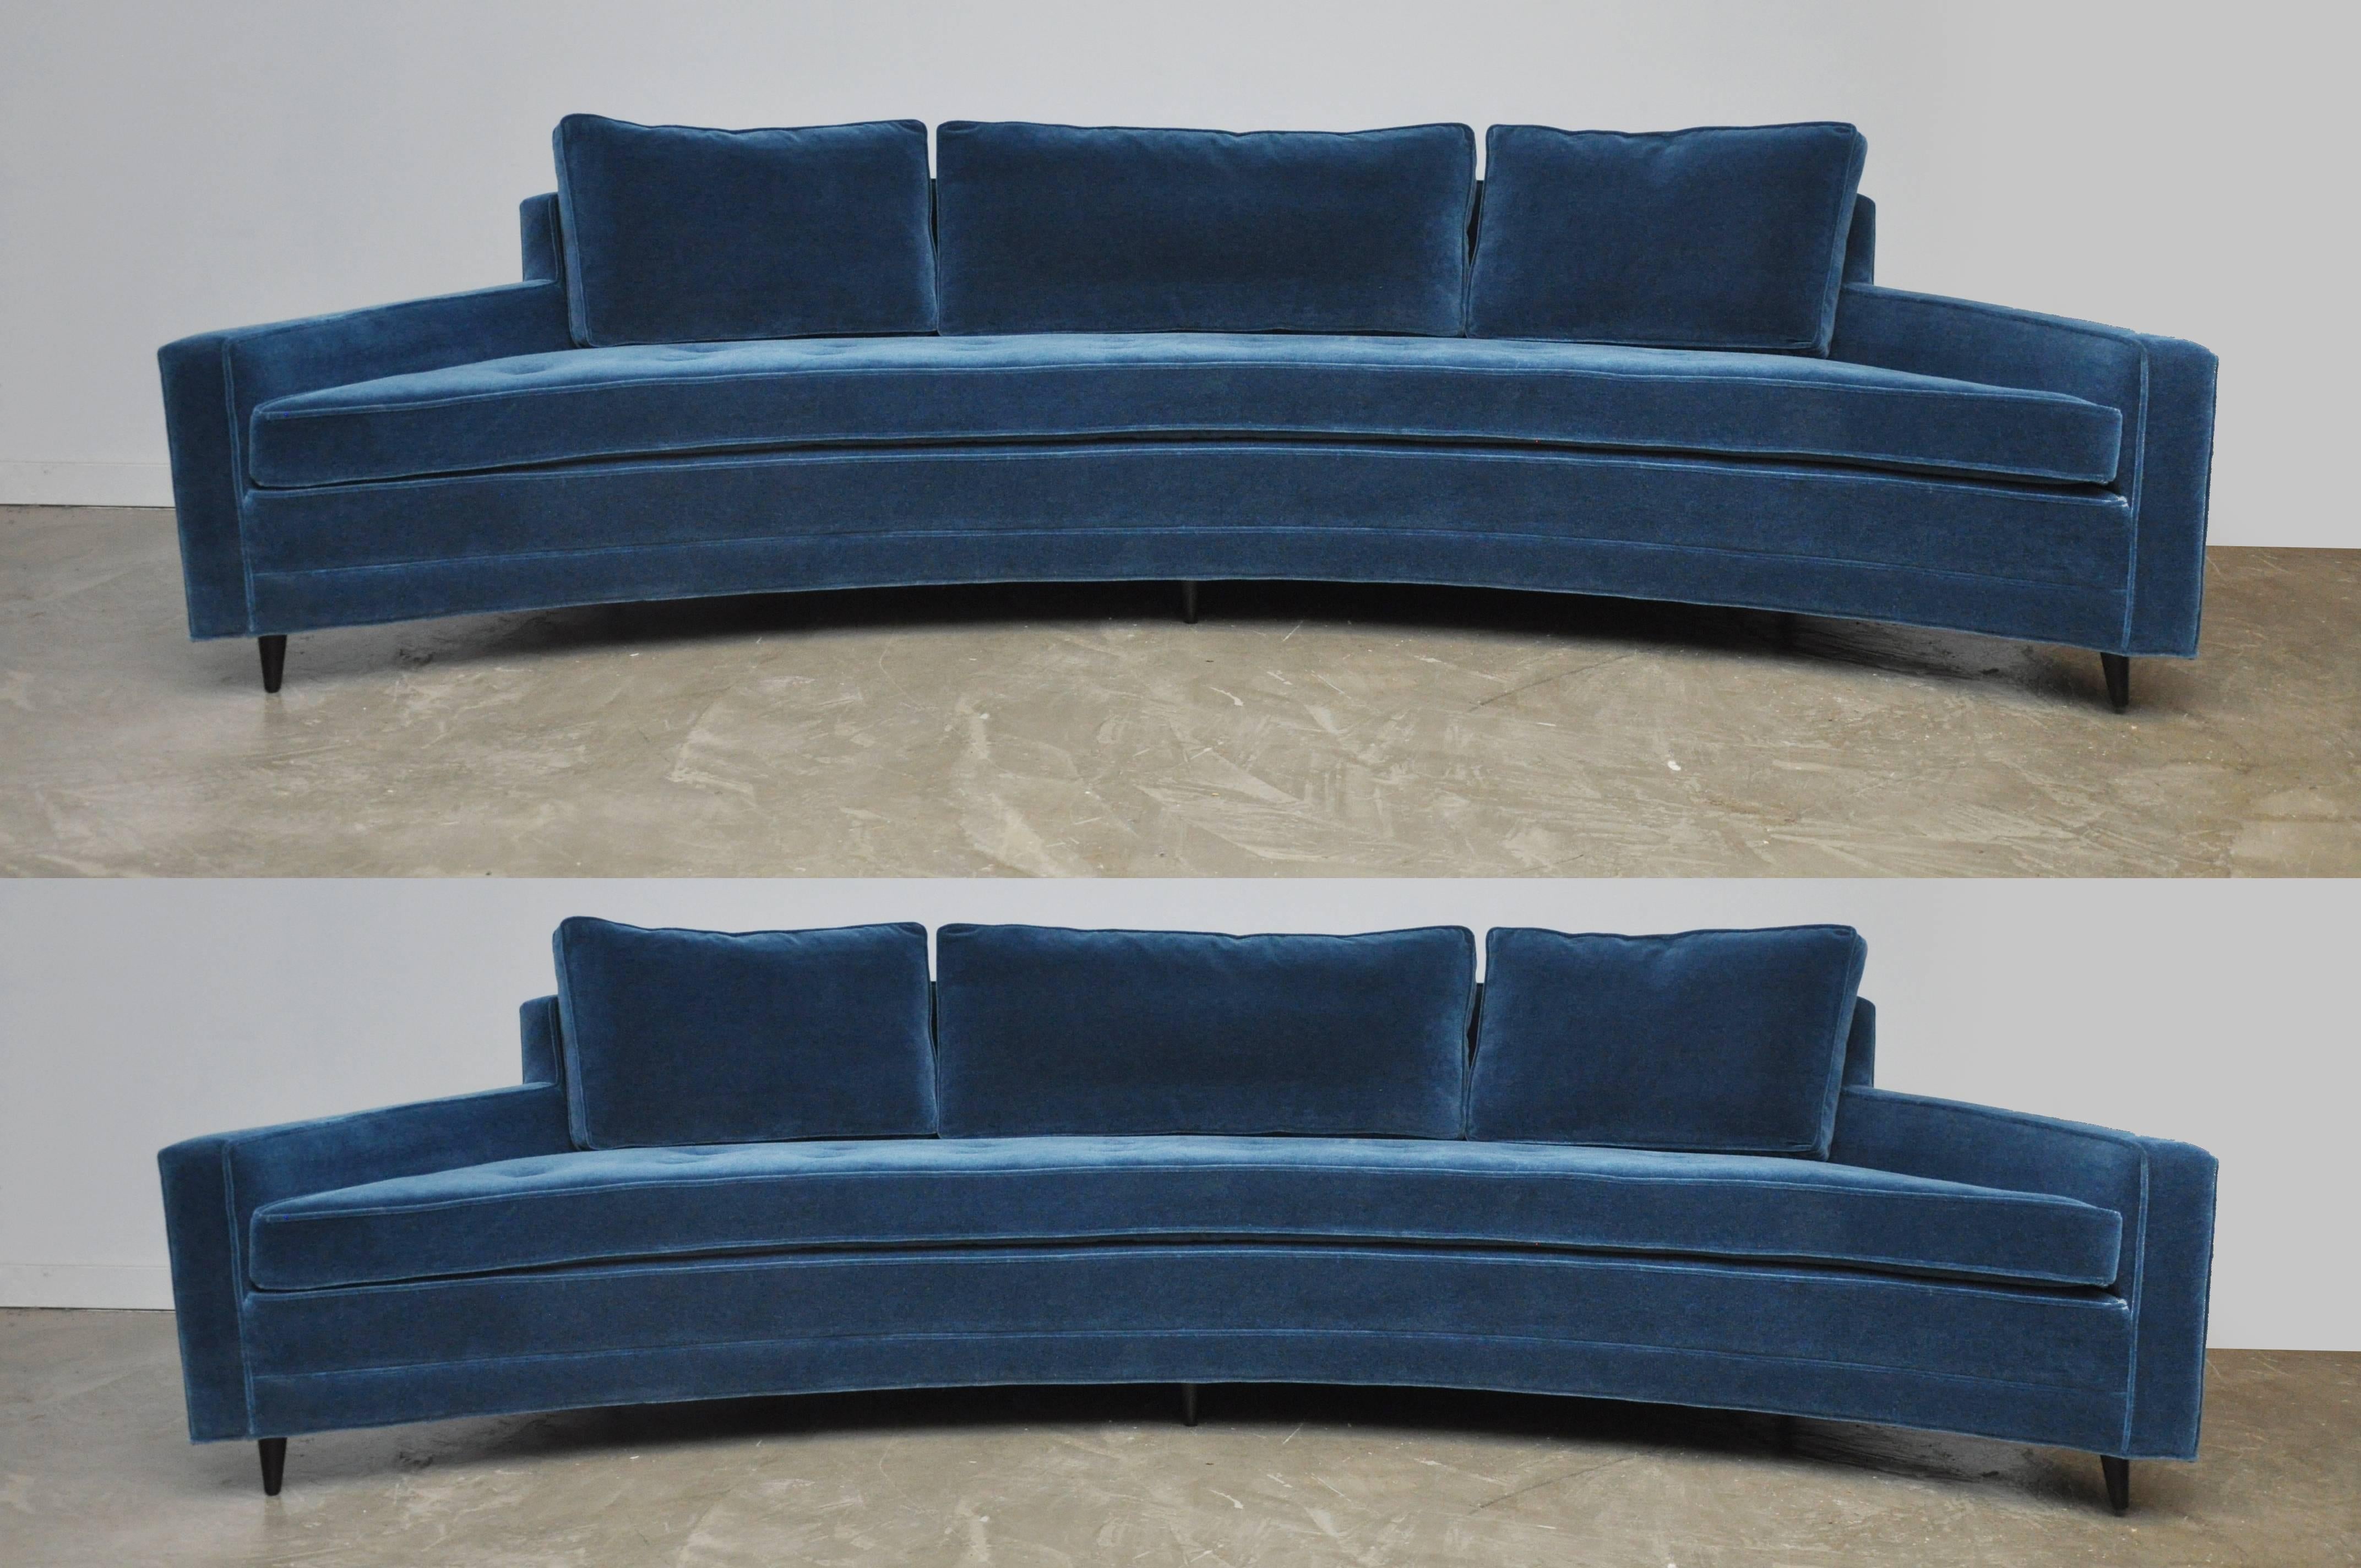 A pair of large curved sofas designed by Harvey Probber. Fully restored. Reupholstered in beautiful blue mohair over refinished espresso tone legs.